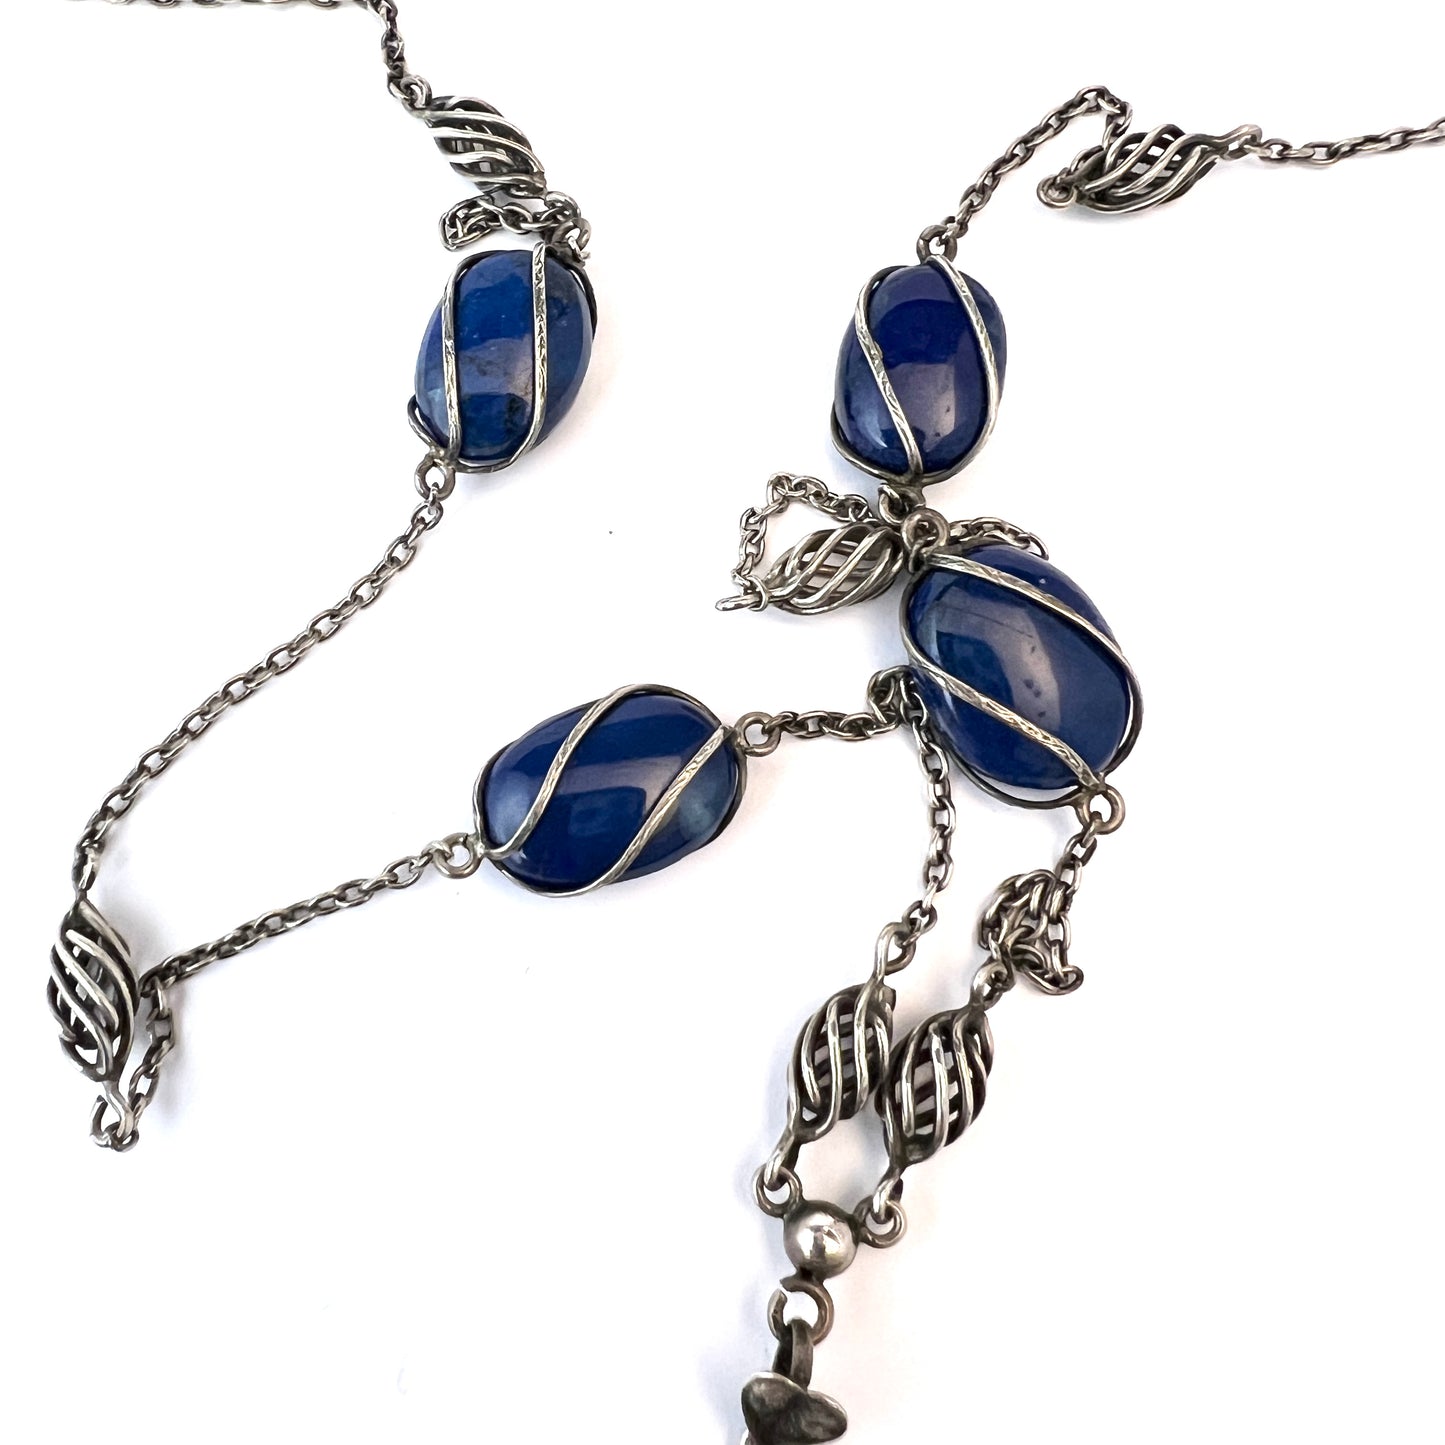 Antique Arts & Crafts Sterling Silver Swiss Lapis Necklace.